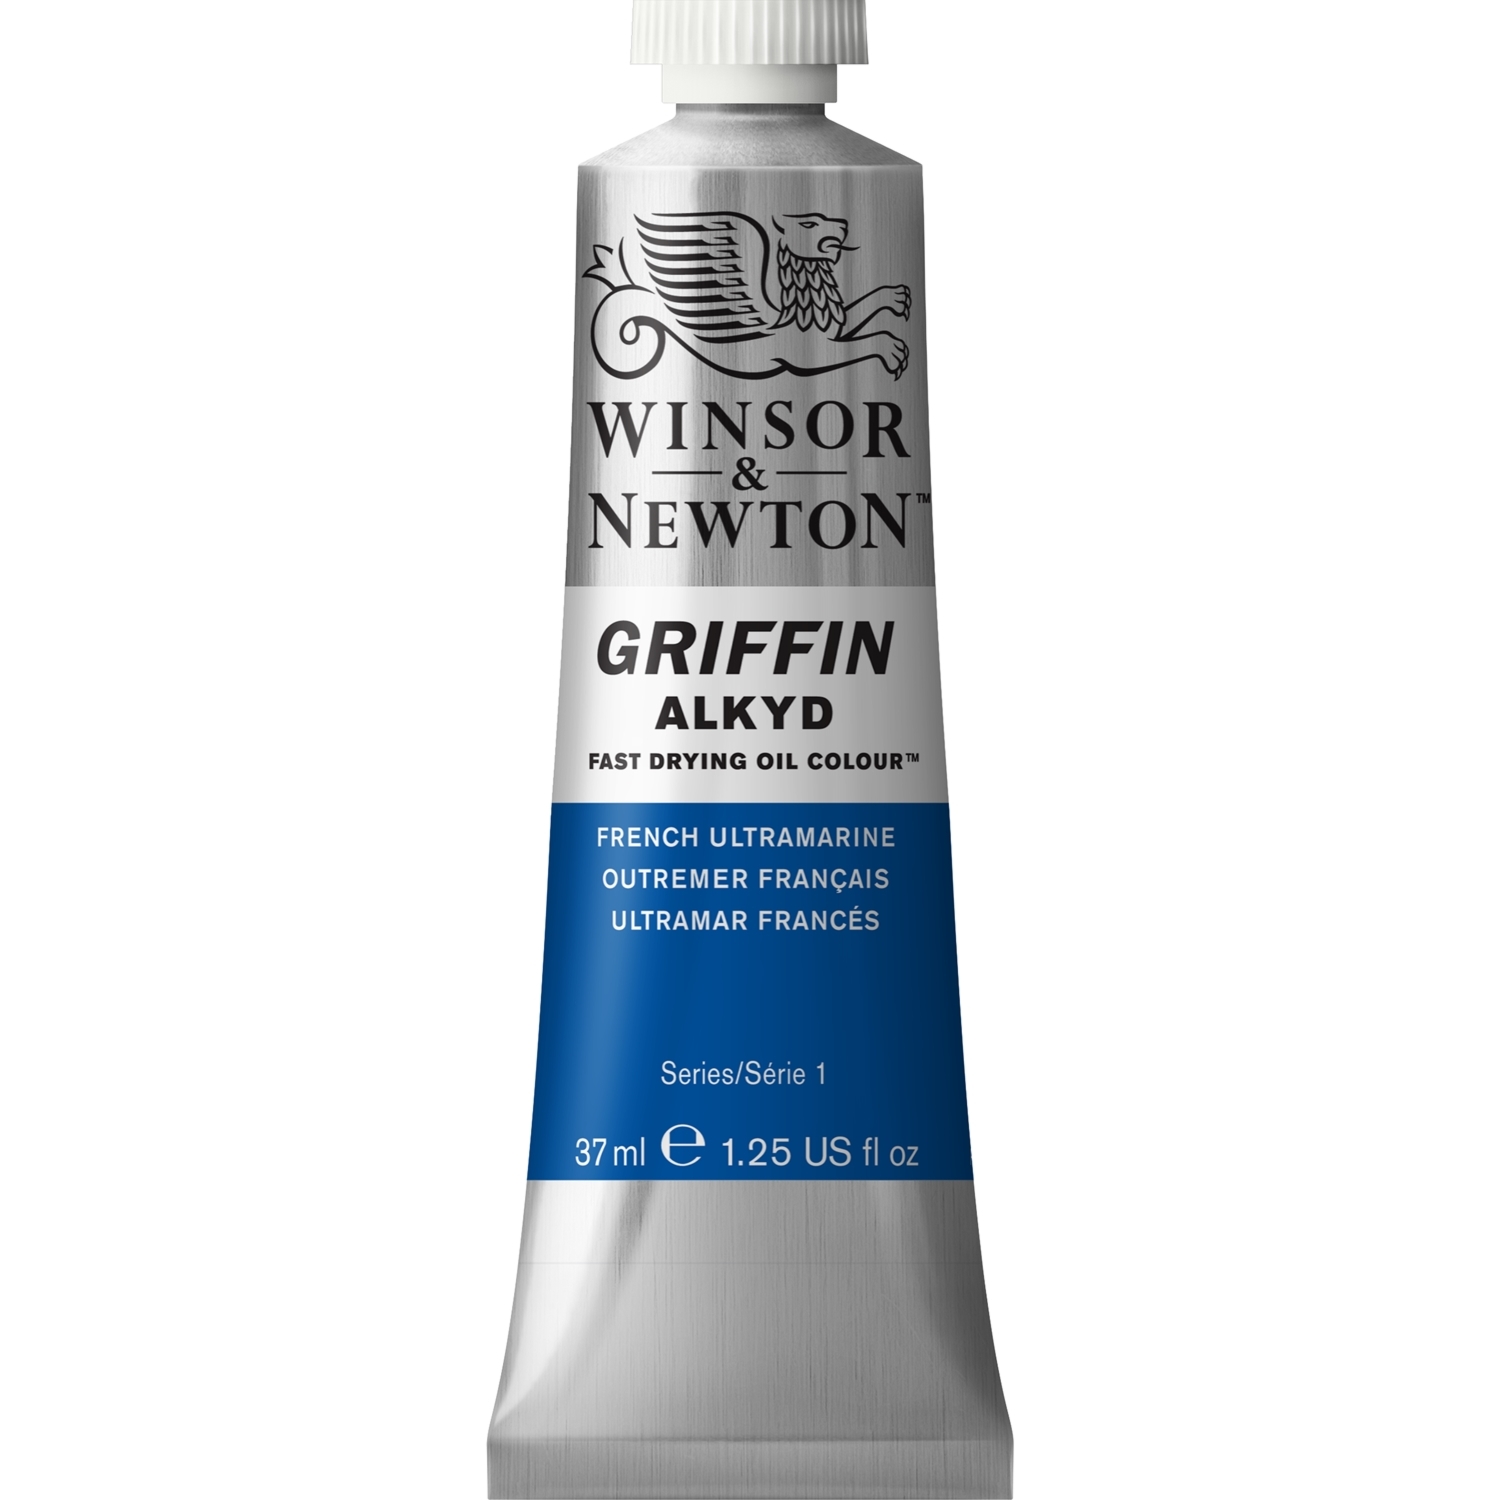 Winsor and Newton Griffin Alkyd Oil Colour - French Ultramarine Image 1